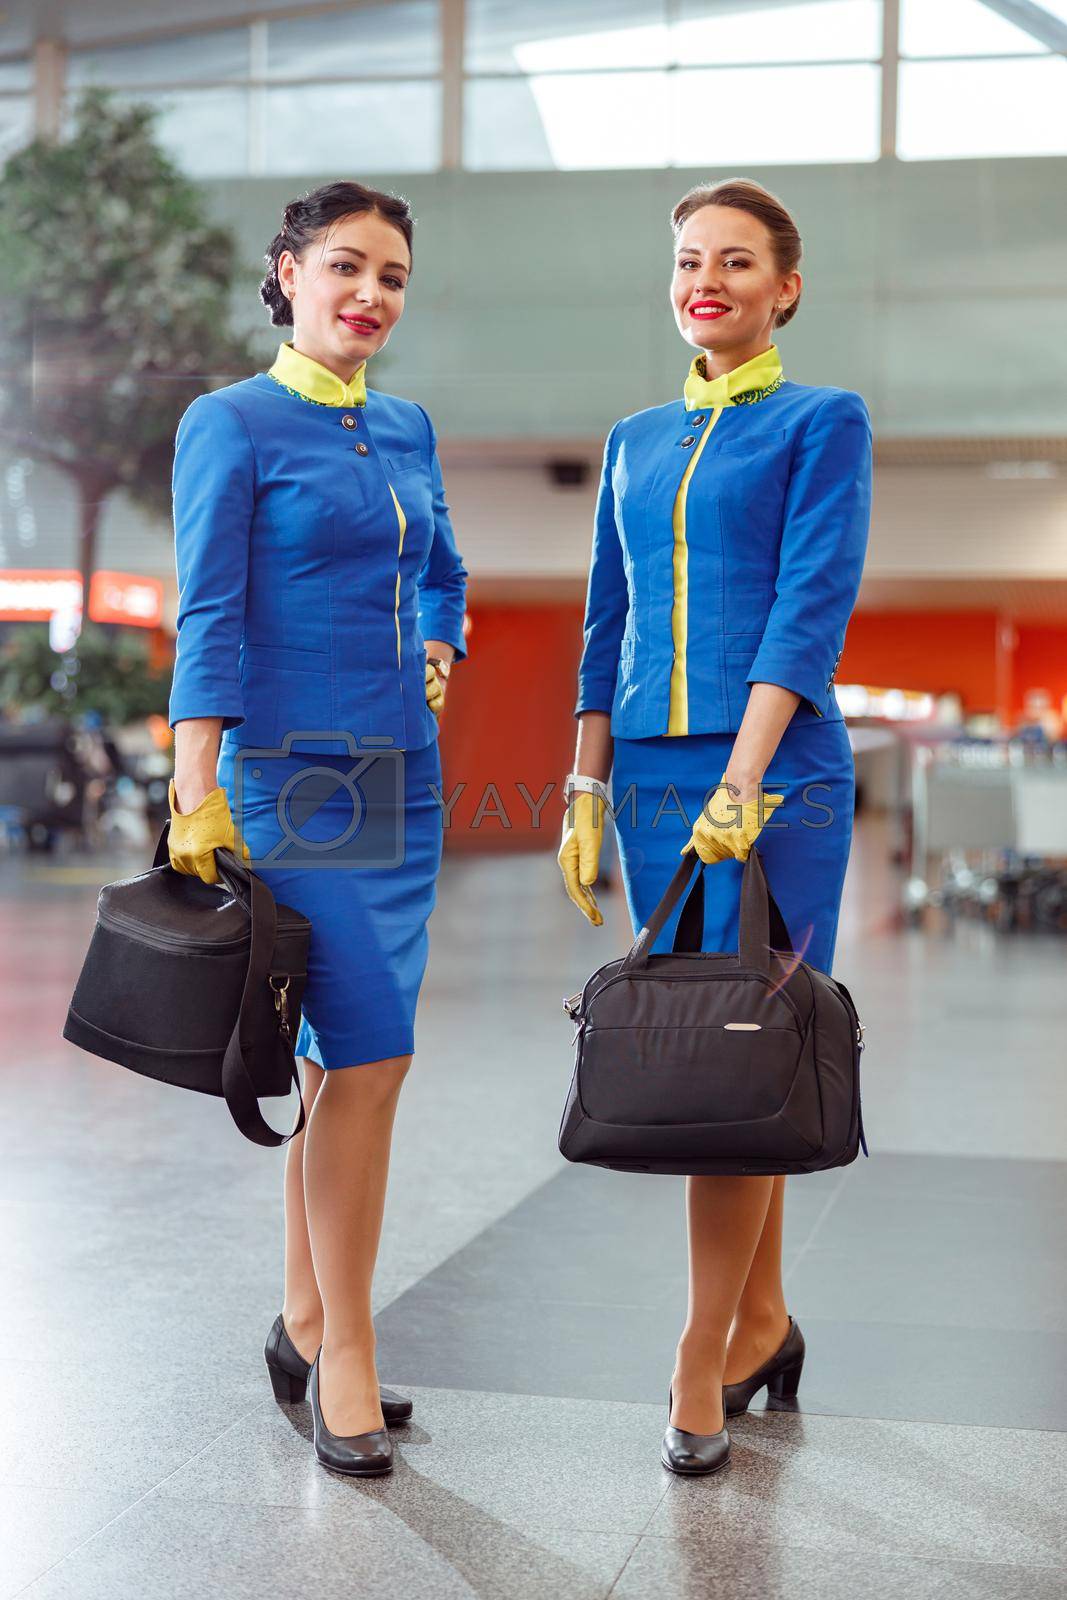 Full length of women flight attendants in aviation air hostess uniform looking at camera and smiling while holding bags